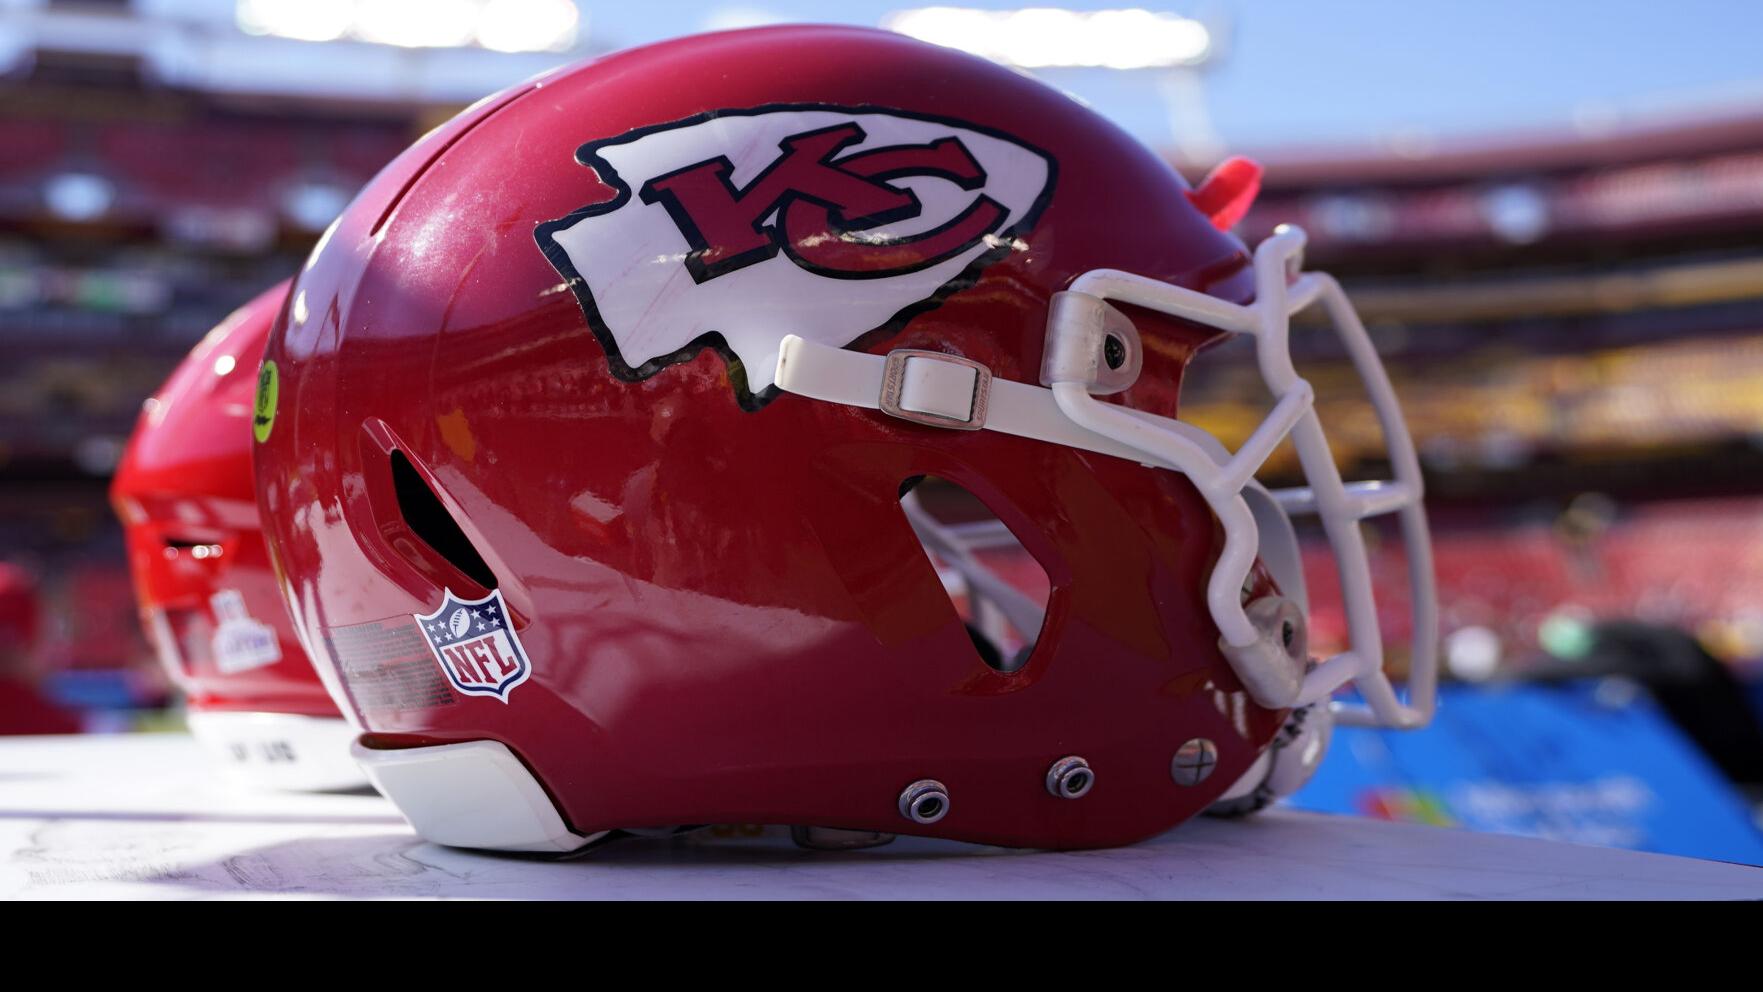 Lions-Chiefs opens NFL season on strong note - Sports Media Watch